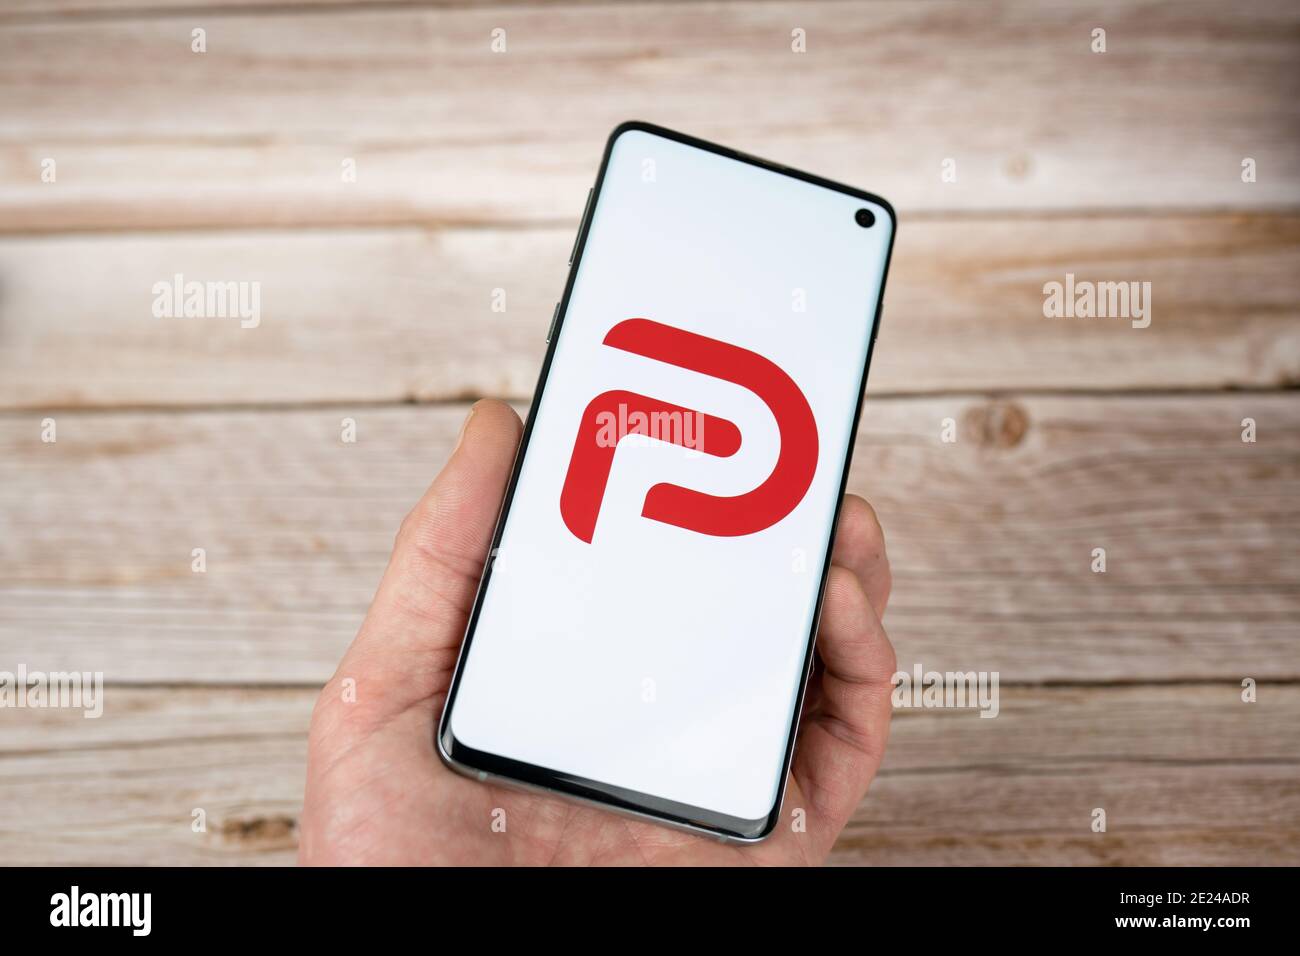 Man holding a smarphone with Parler logo, a free speech social network app. Red logo on white background Stock Photo